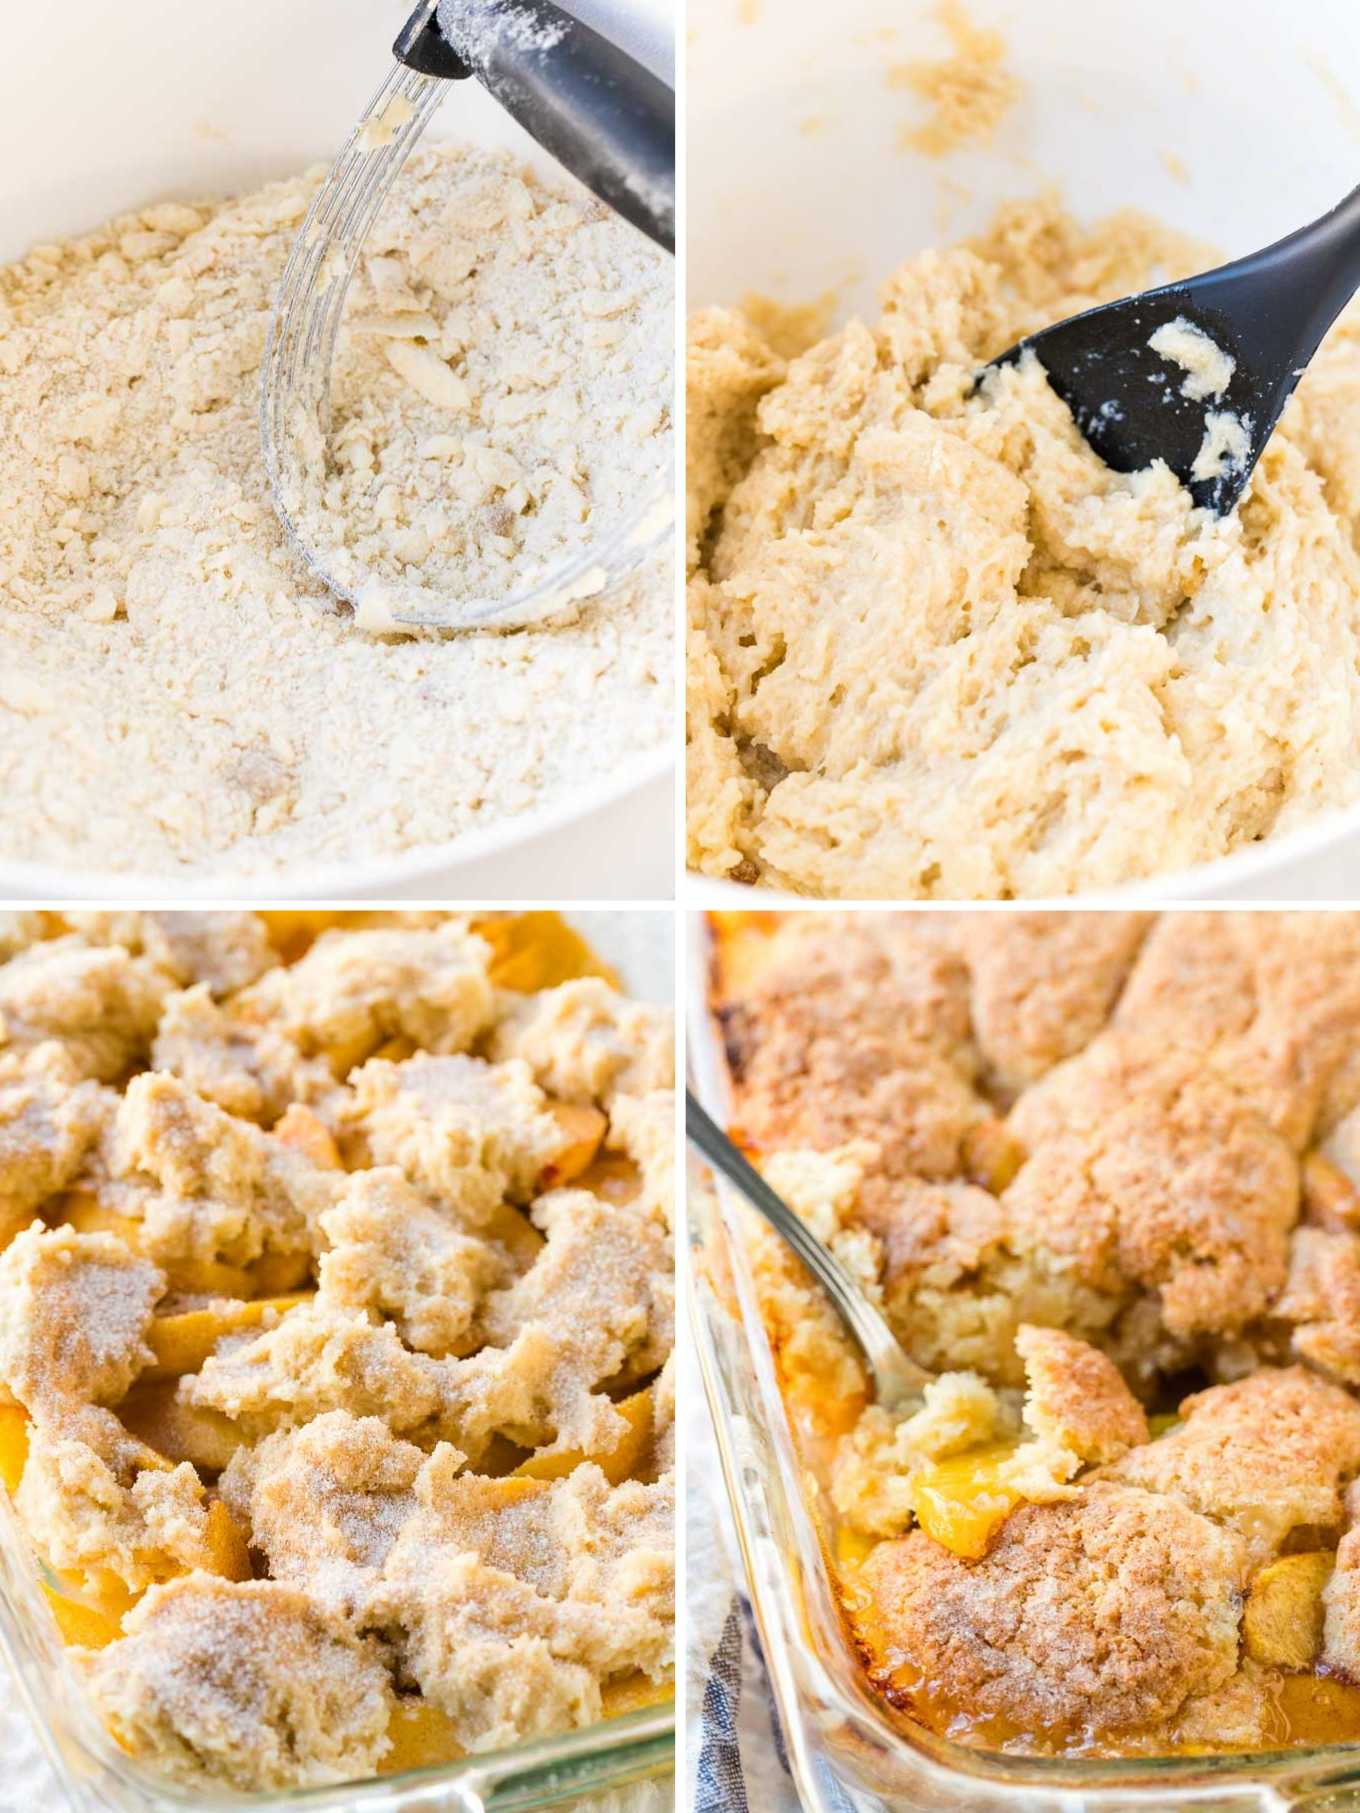 How to make Peach Cobbler from Scratch Collage.